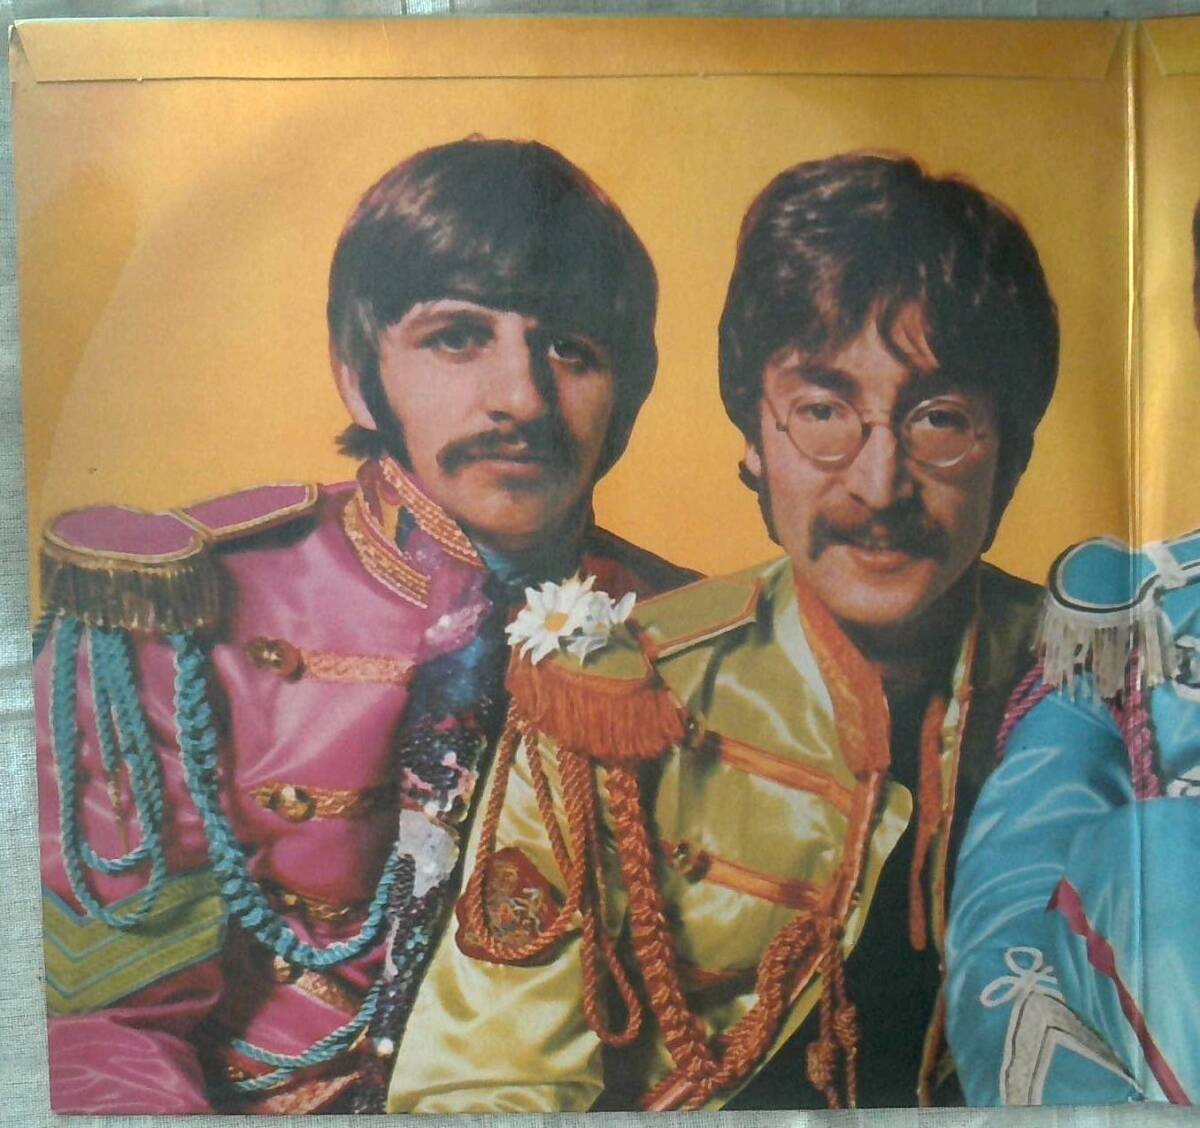 The Beatles SGT. Peppers Loleny Herats Club Band ドイツオリジナル盤 Odeon Horzu SHZE 401 LP レコード_画像4